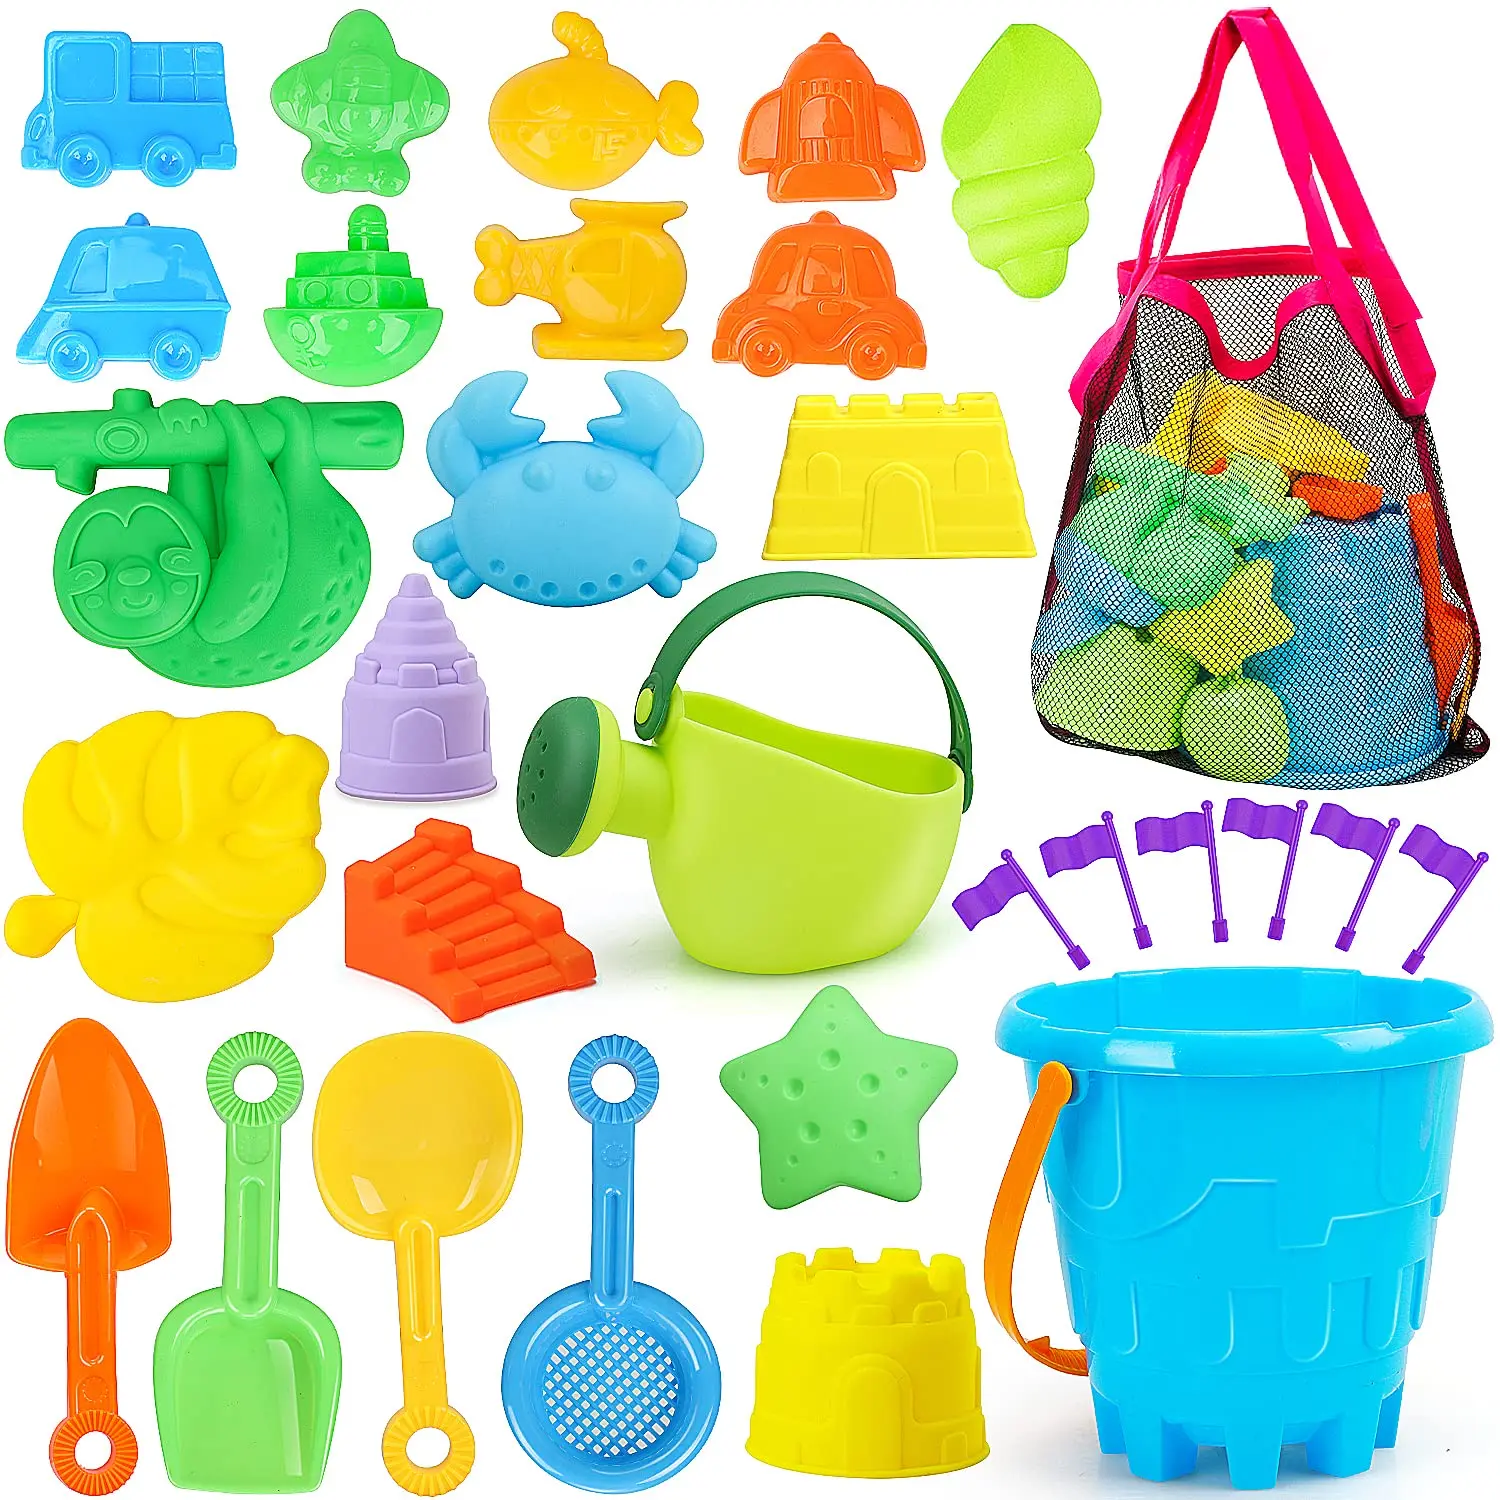 

(Only for US customers) TOY Life 37PCS Plastic Portable Bucket Castle Play Sand Kit Snow Mold Kids Beach Toys with Shovels